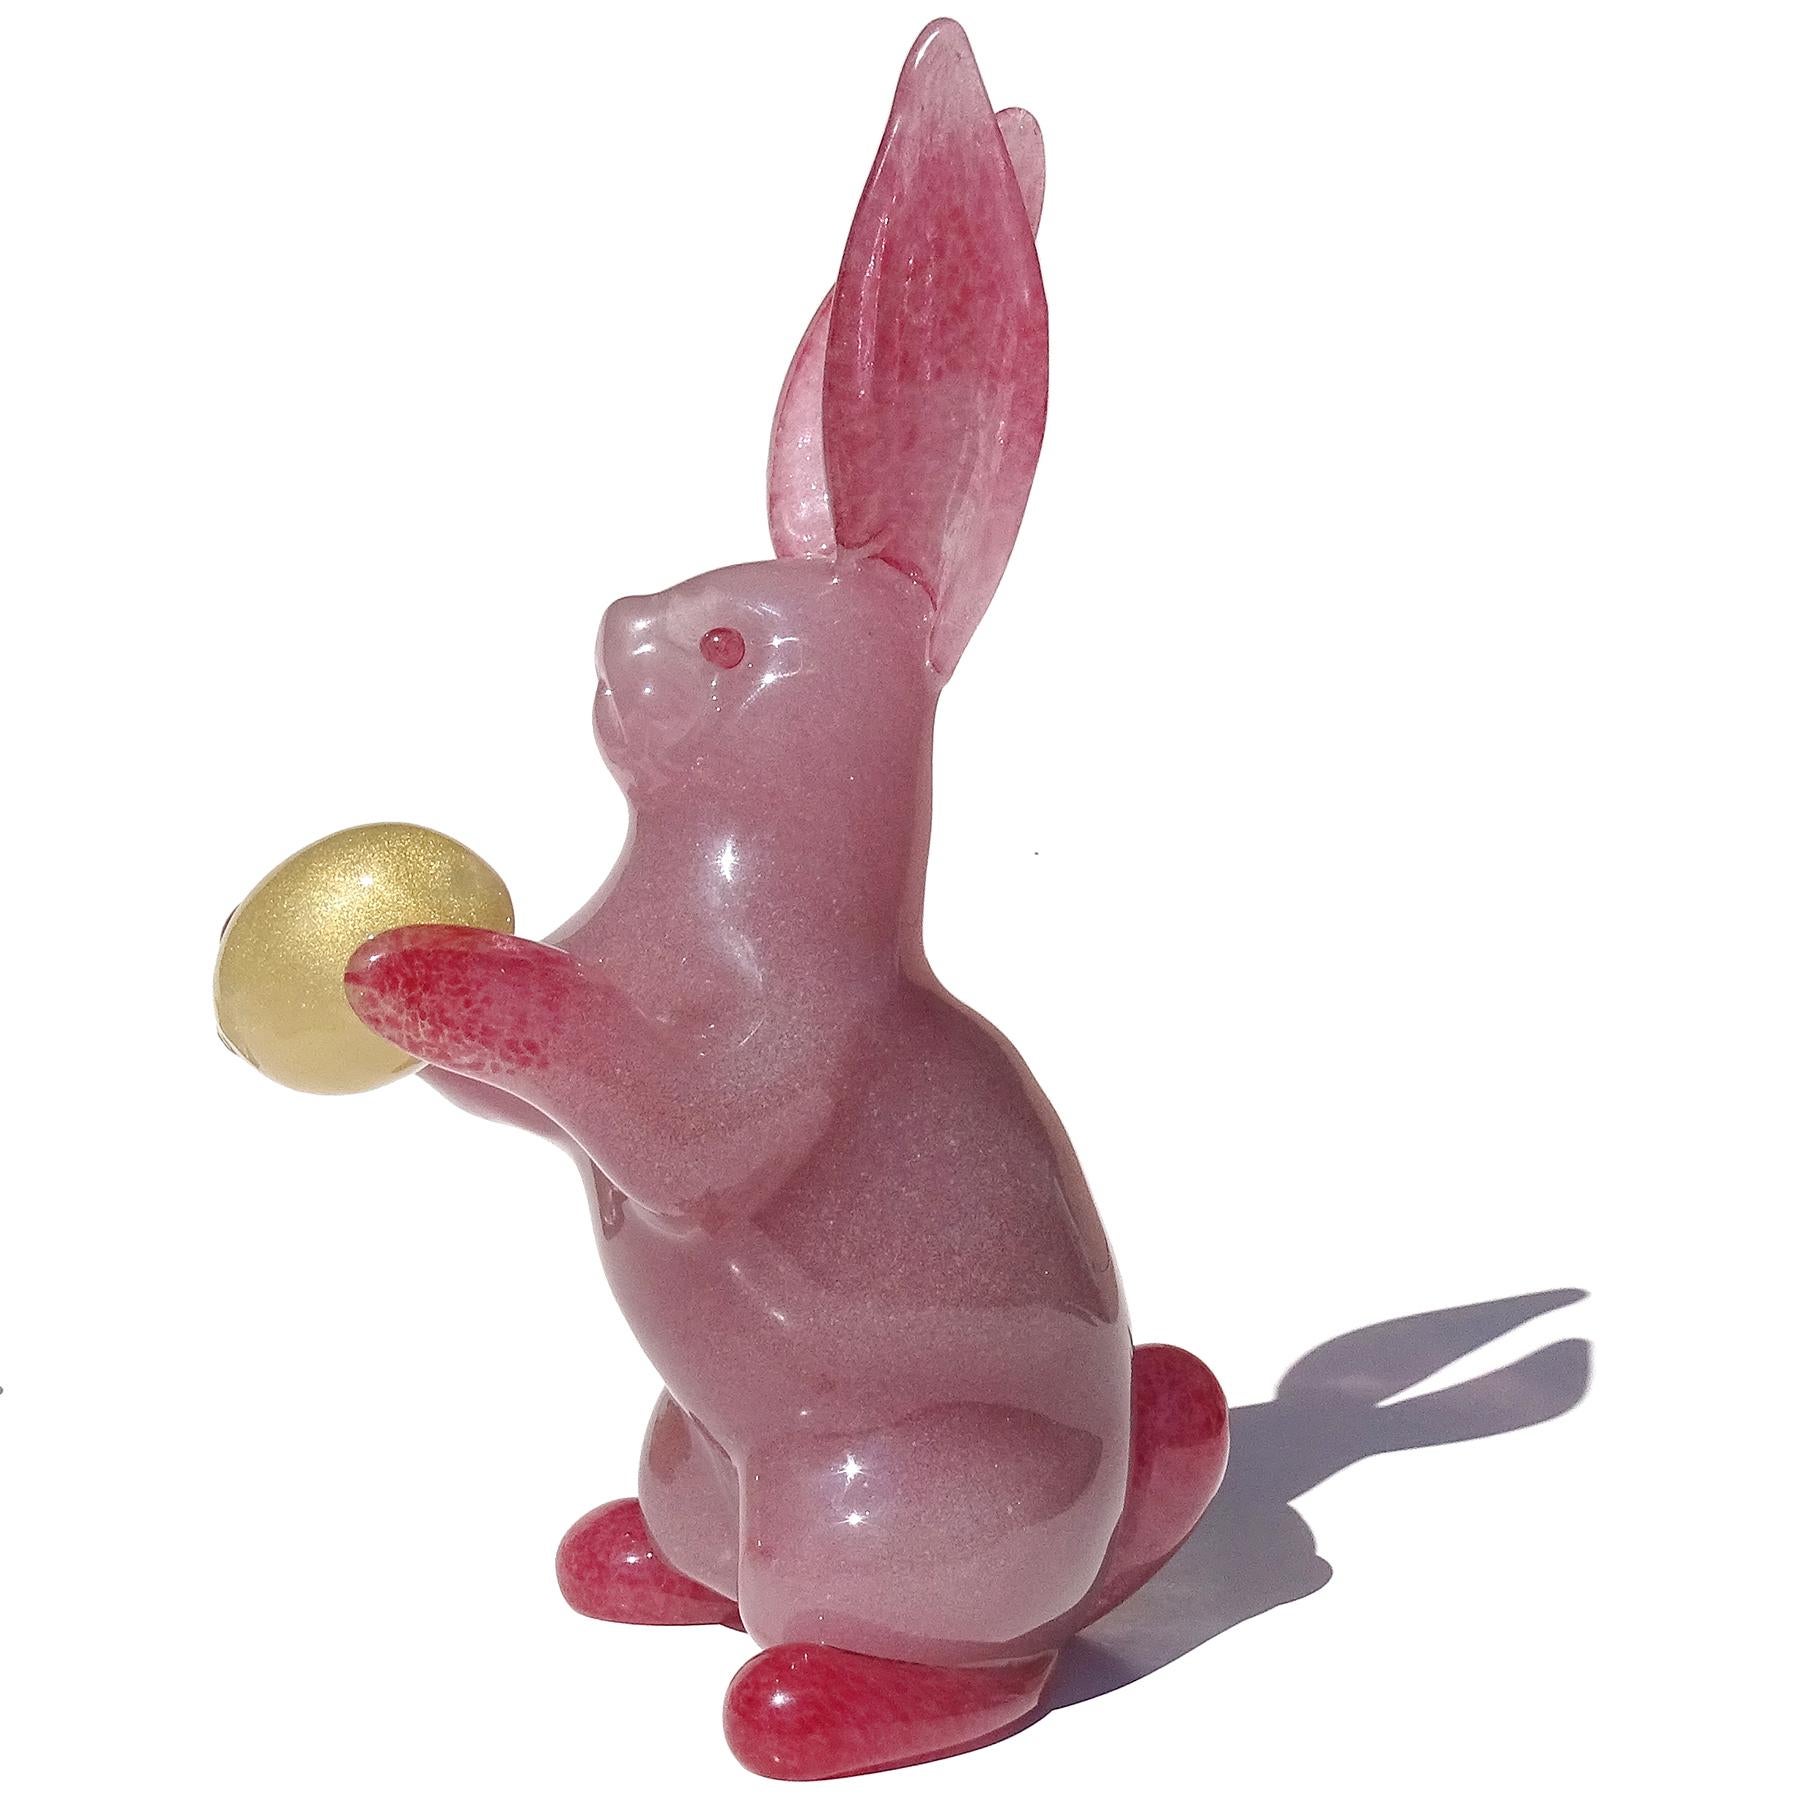 Beautiful and very large, vintage Murano hand blown pink bubbles and golden egg Italian art glass Easter Bunny rabbit sculpture. The rabbit is very nicely detailed with a cute face, big ears and it is holding an egg. The body is made in the